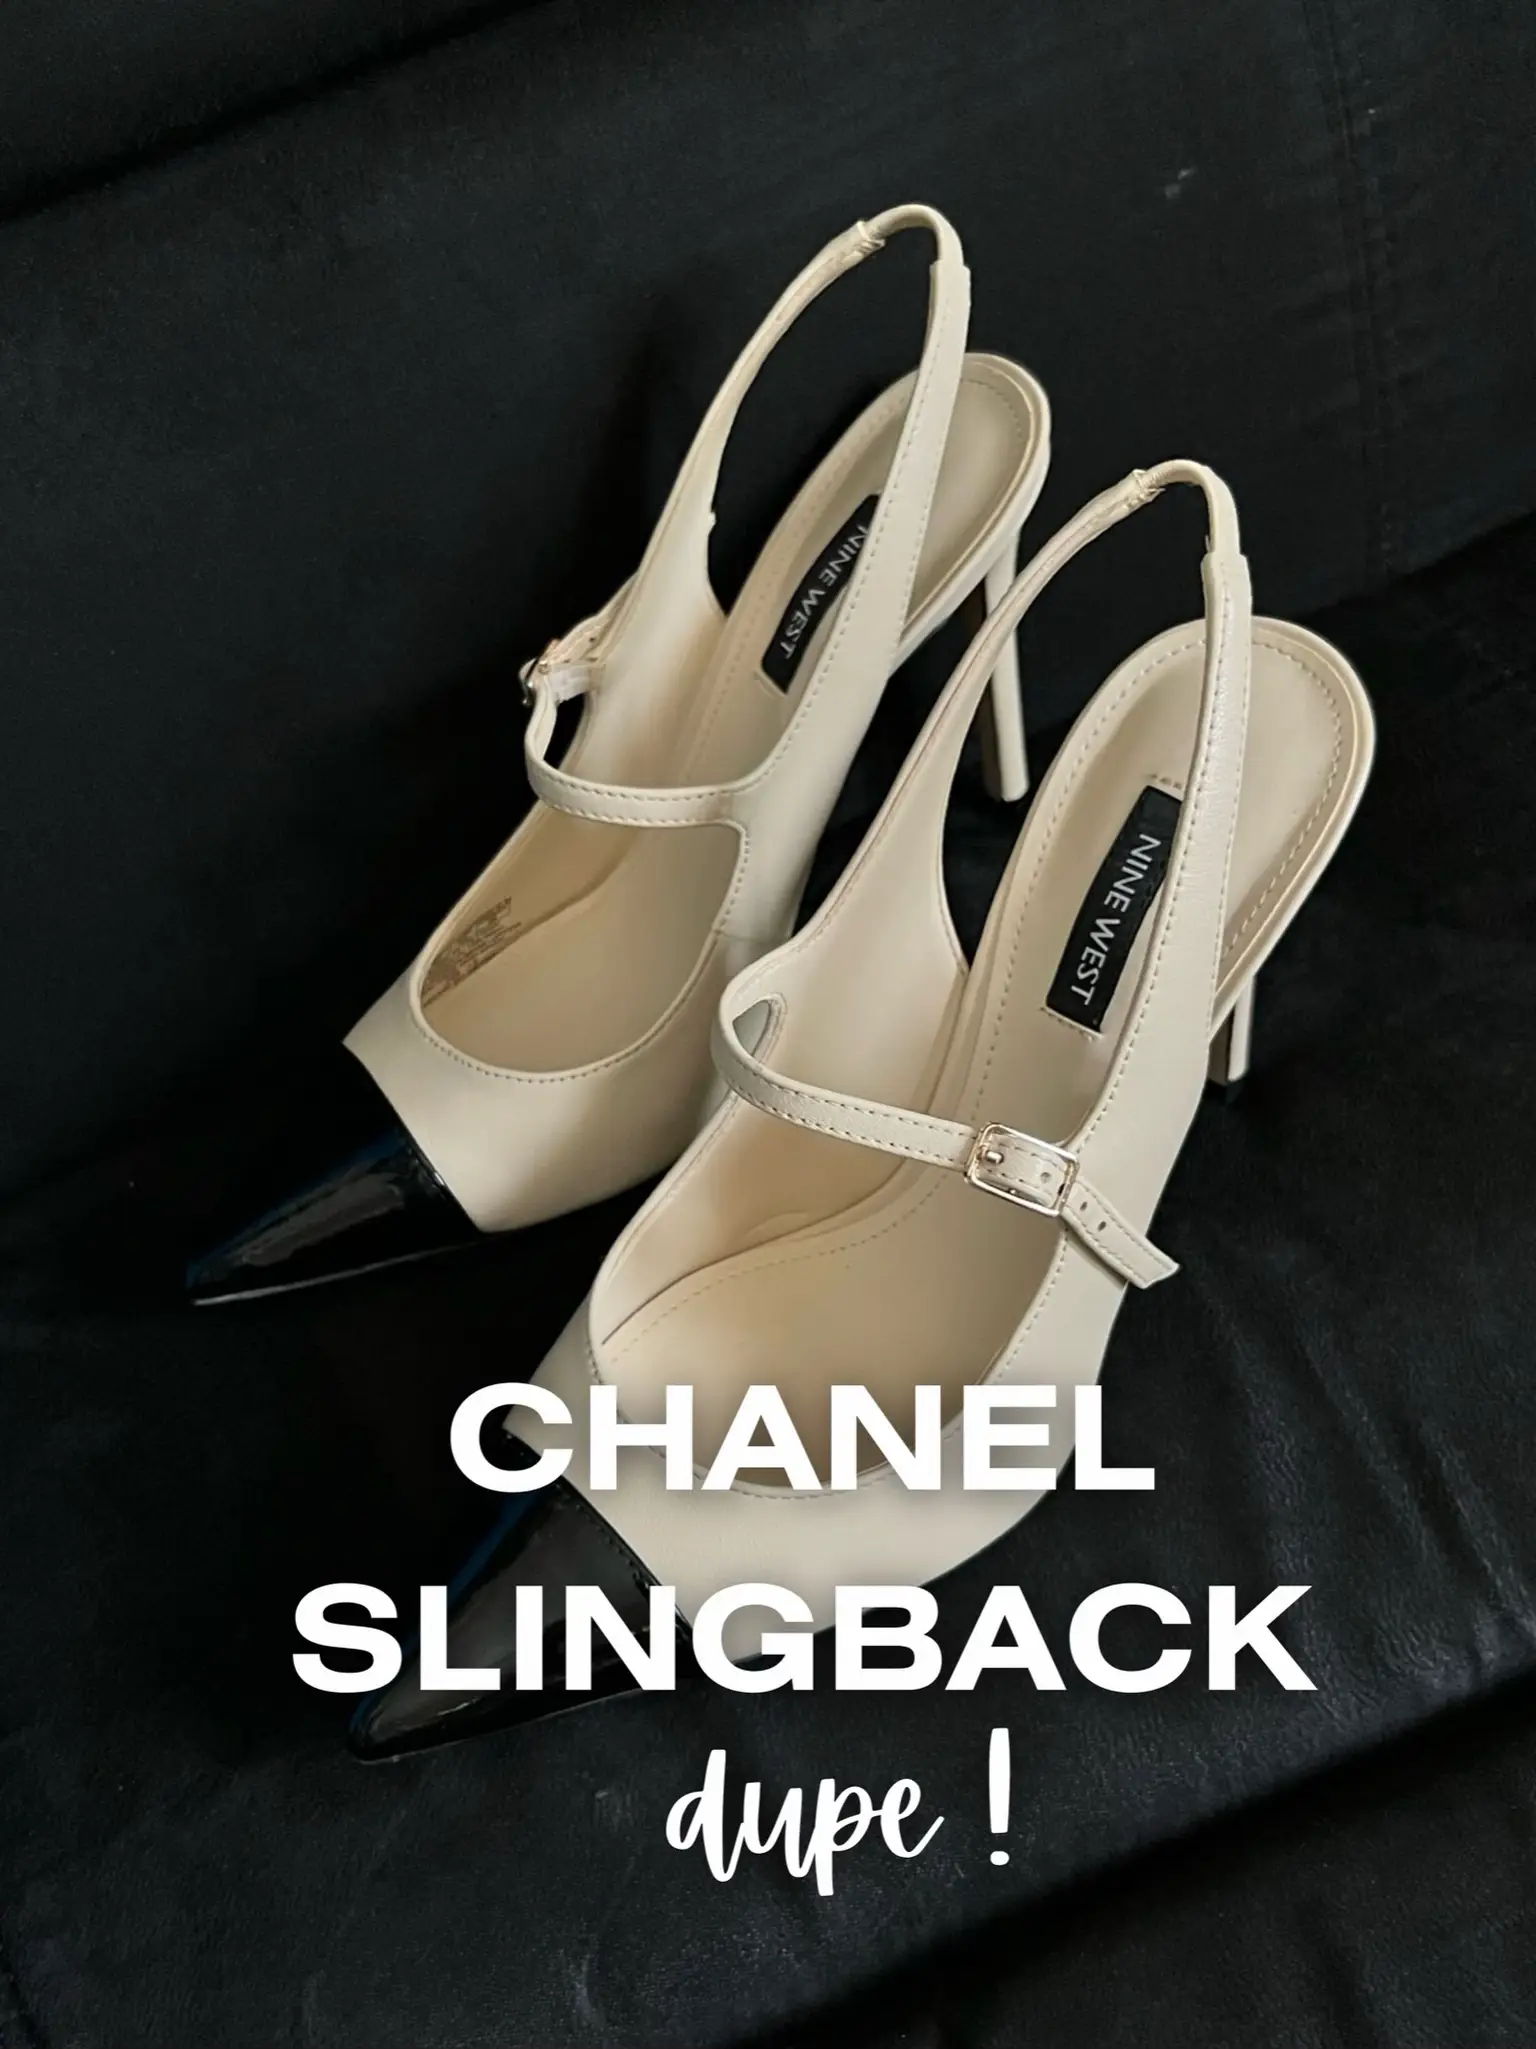 CHANEL SLINGBACK DUPE! Only 300K✨😍, Gallery posted by Gabrielle Wangs